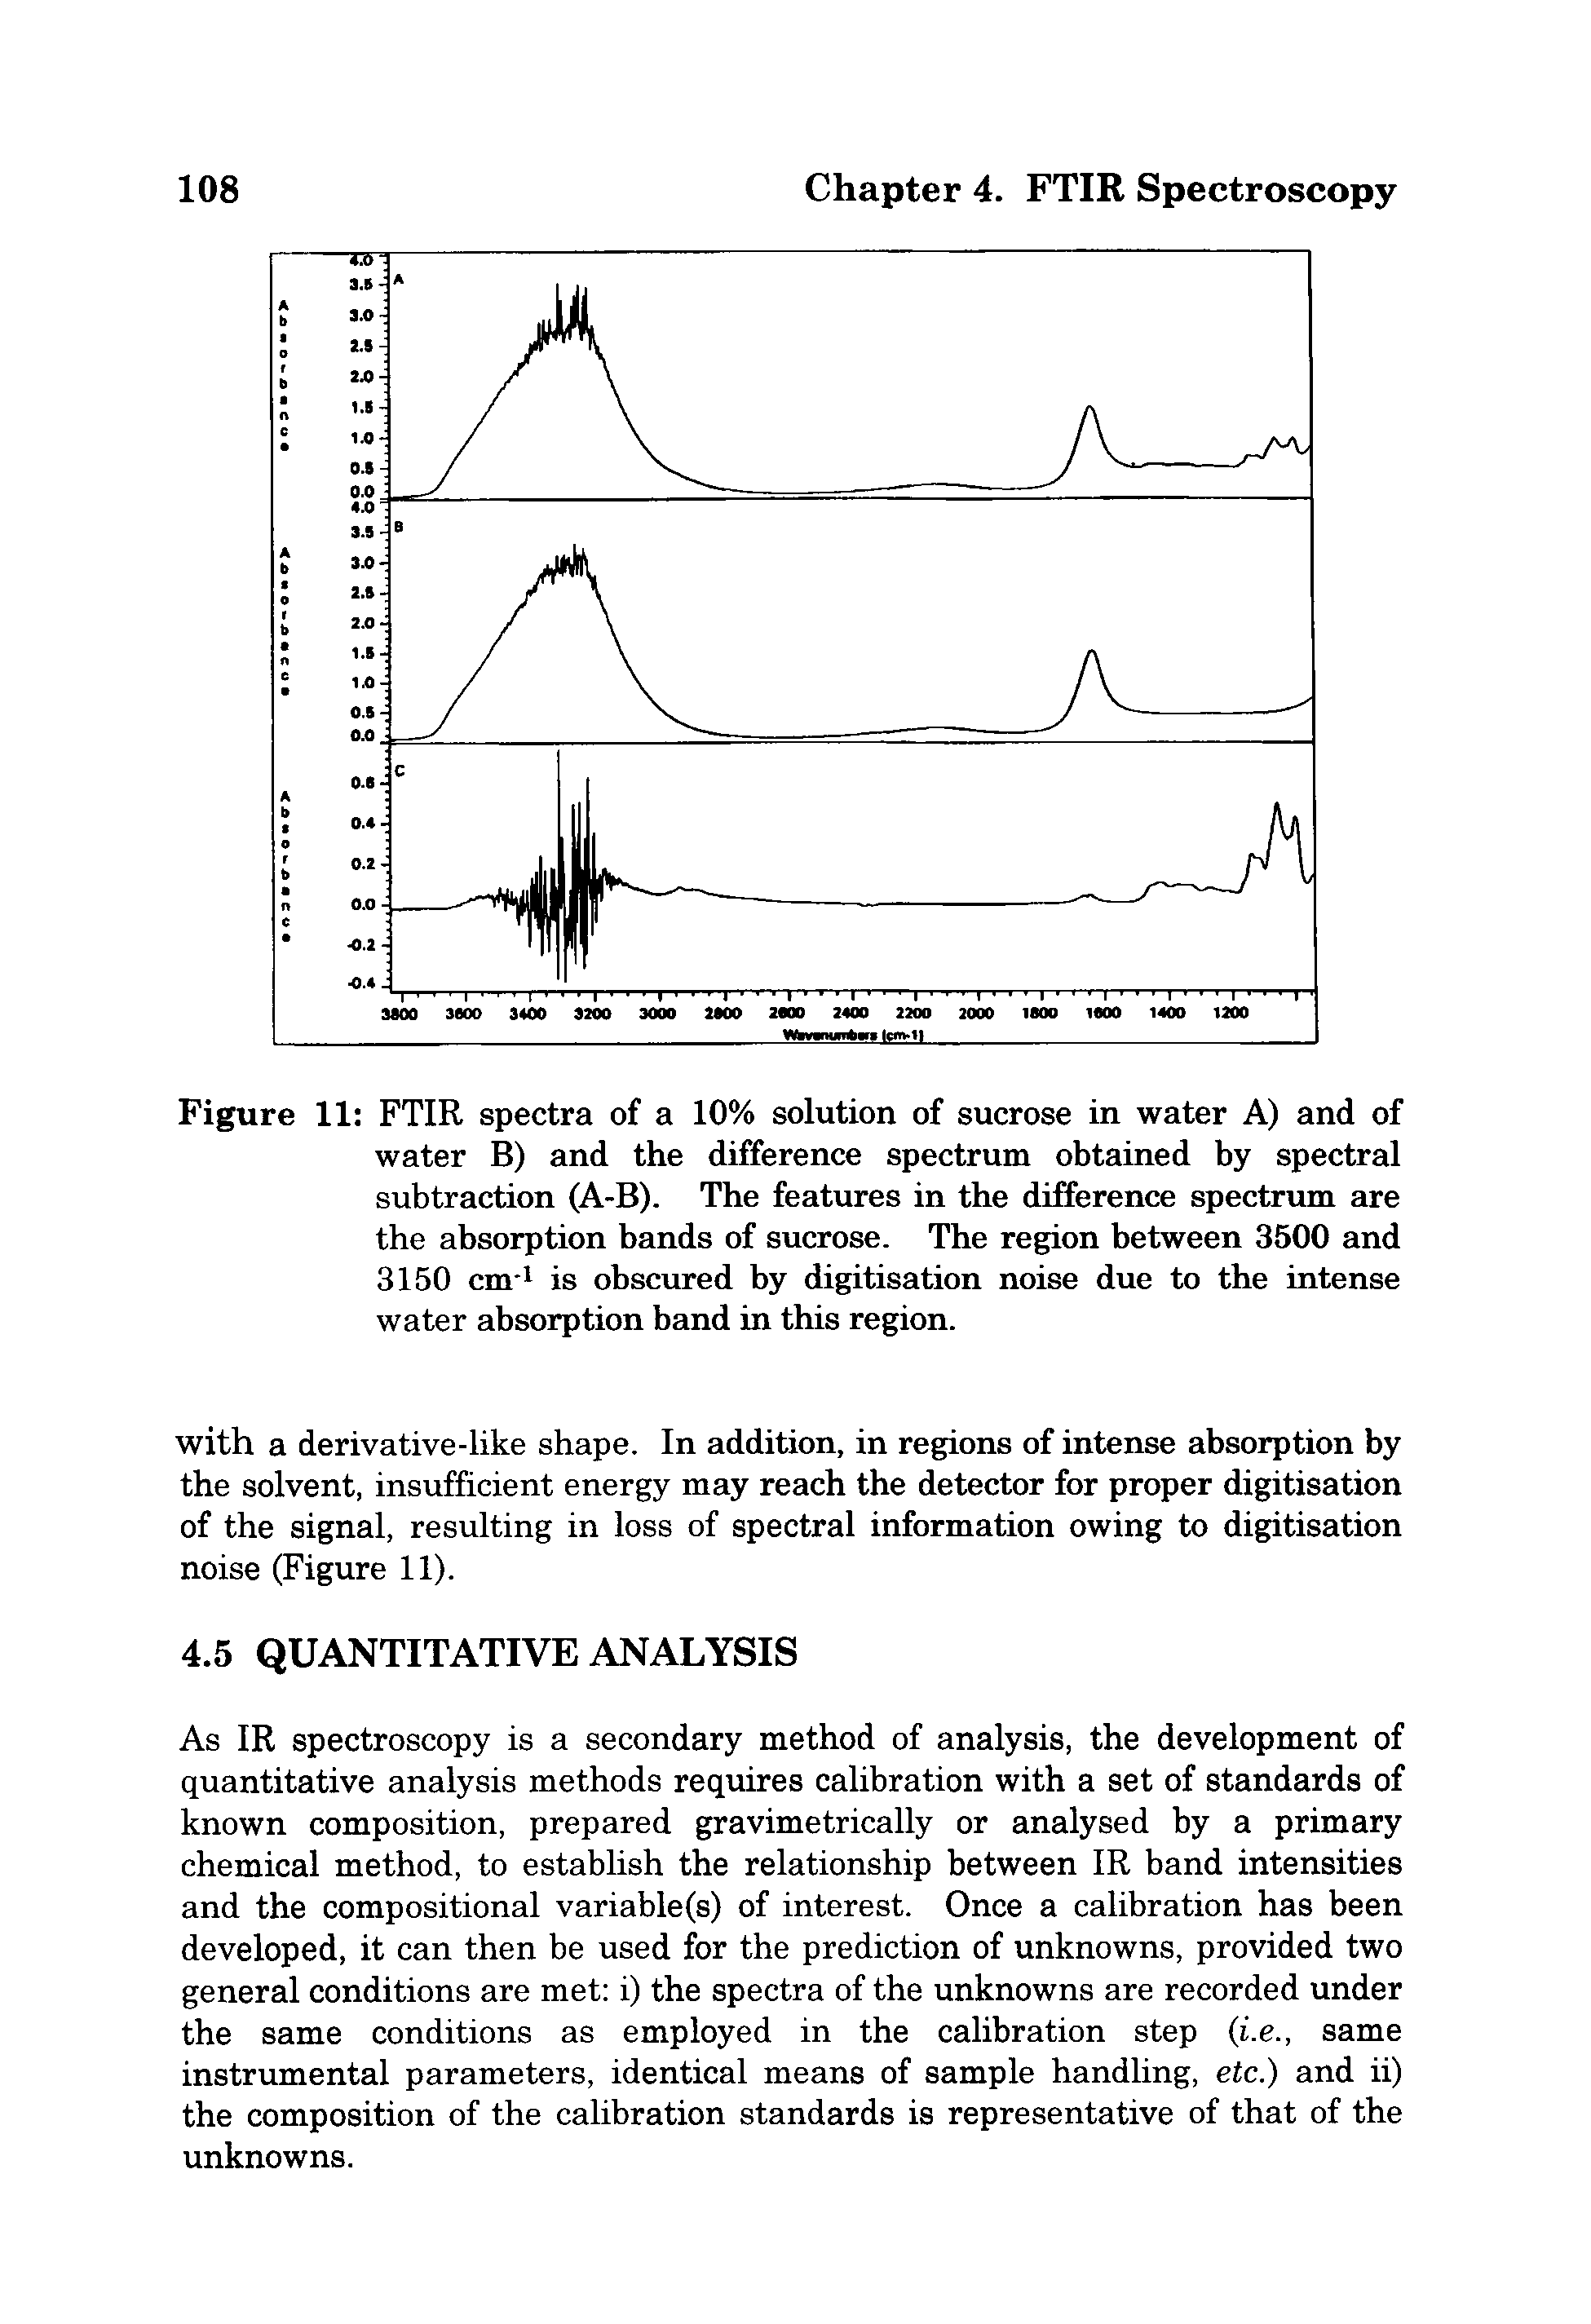 Figure 11 FTIR spectra of a 10% solution of sucrose in water A) and of water B) and the difference spectrum obtained by spectral subtraction (A-B). The features in the difference spectrum are the absorption bands of sucrose. The region between 3500 and 3150 cm-i is obscured by digitisation noise due to the intense water absorption band in this region.